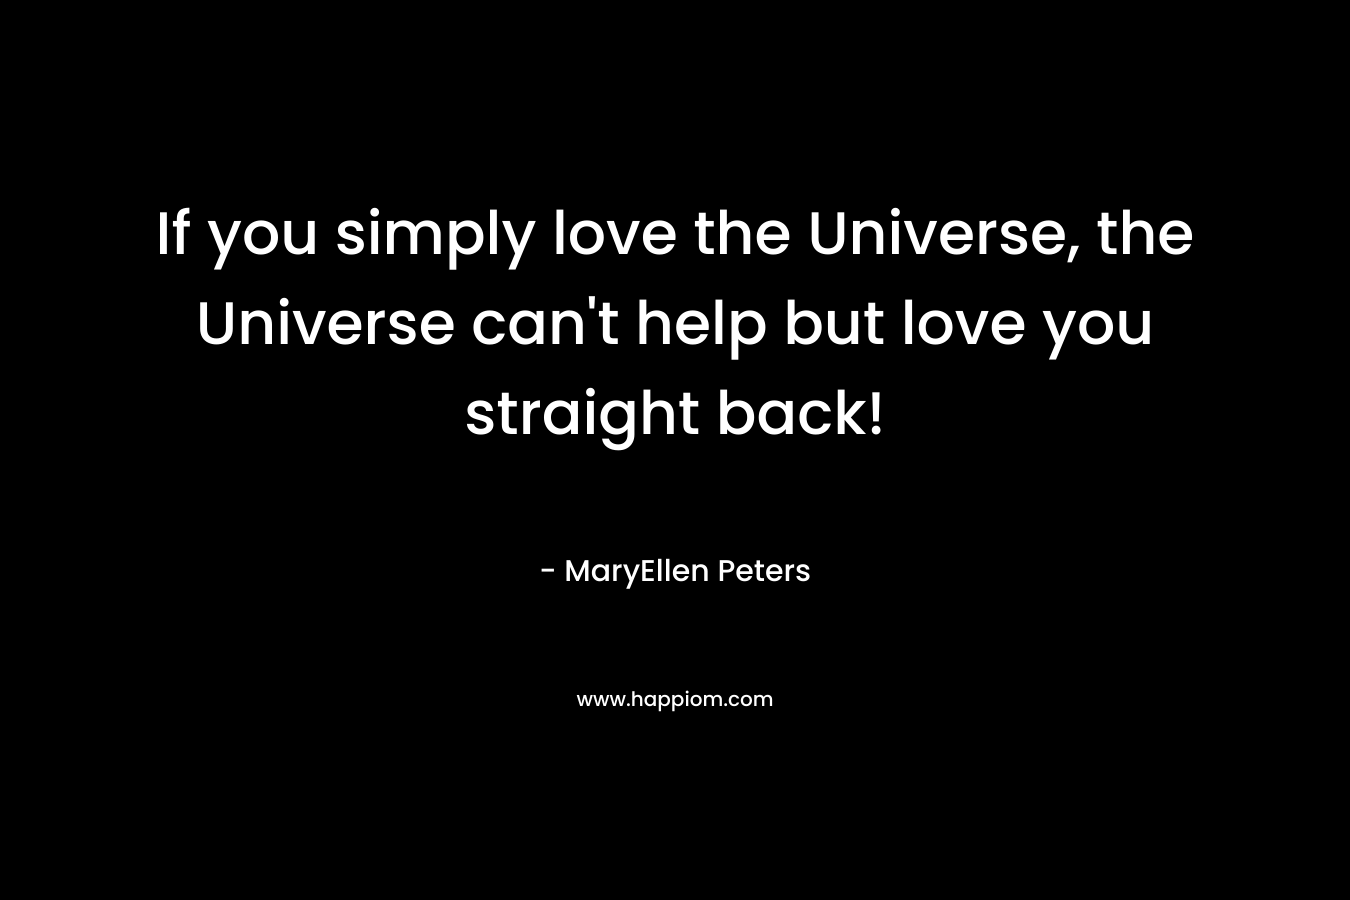 If you simply love the Universe, the Universe can’t help but love you straight back! – MaryEllen Peters